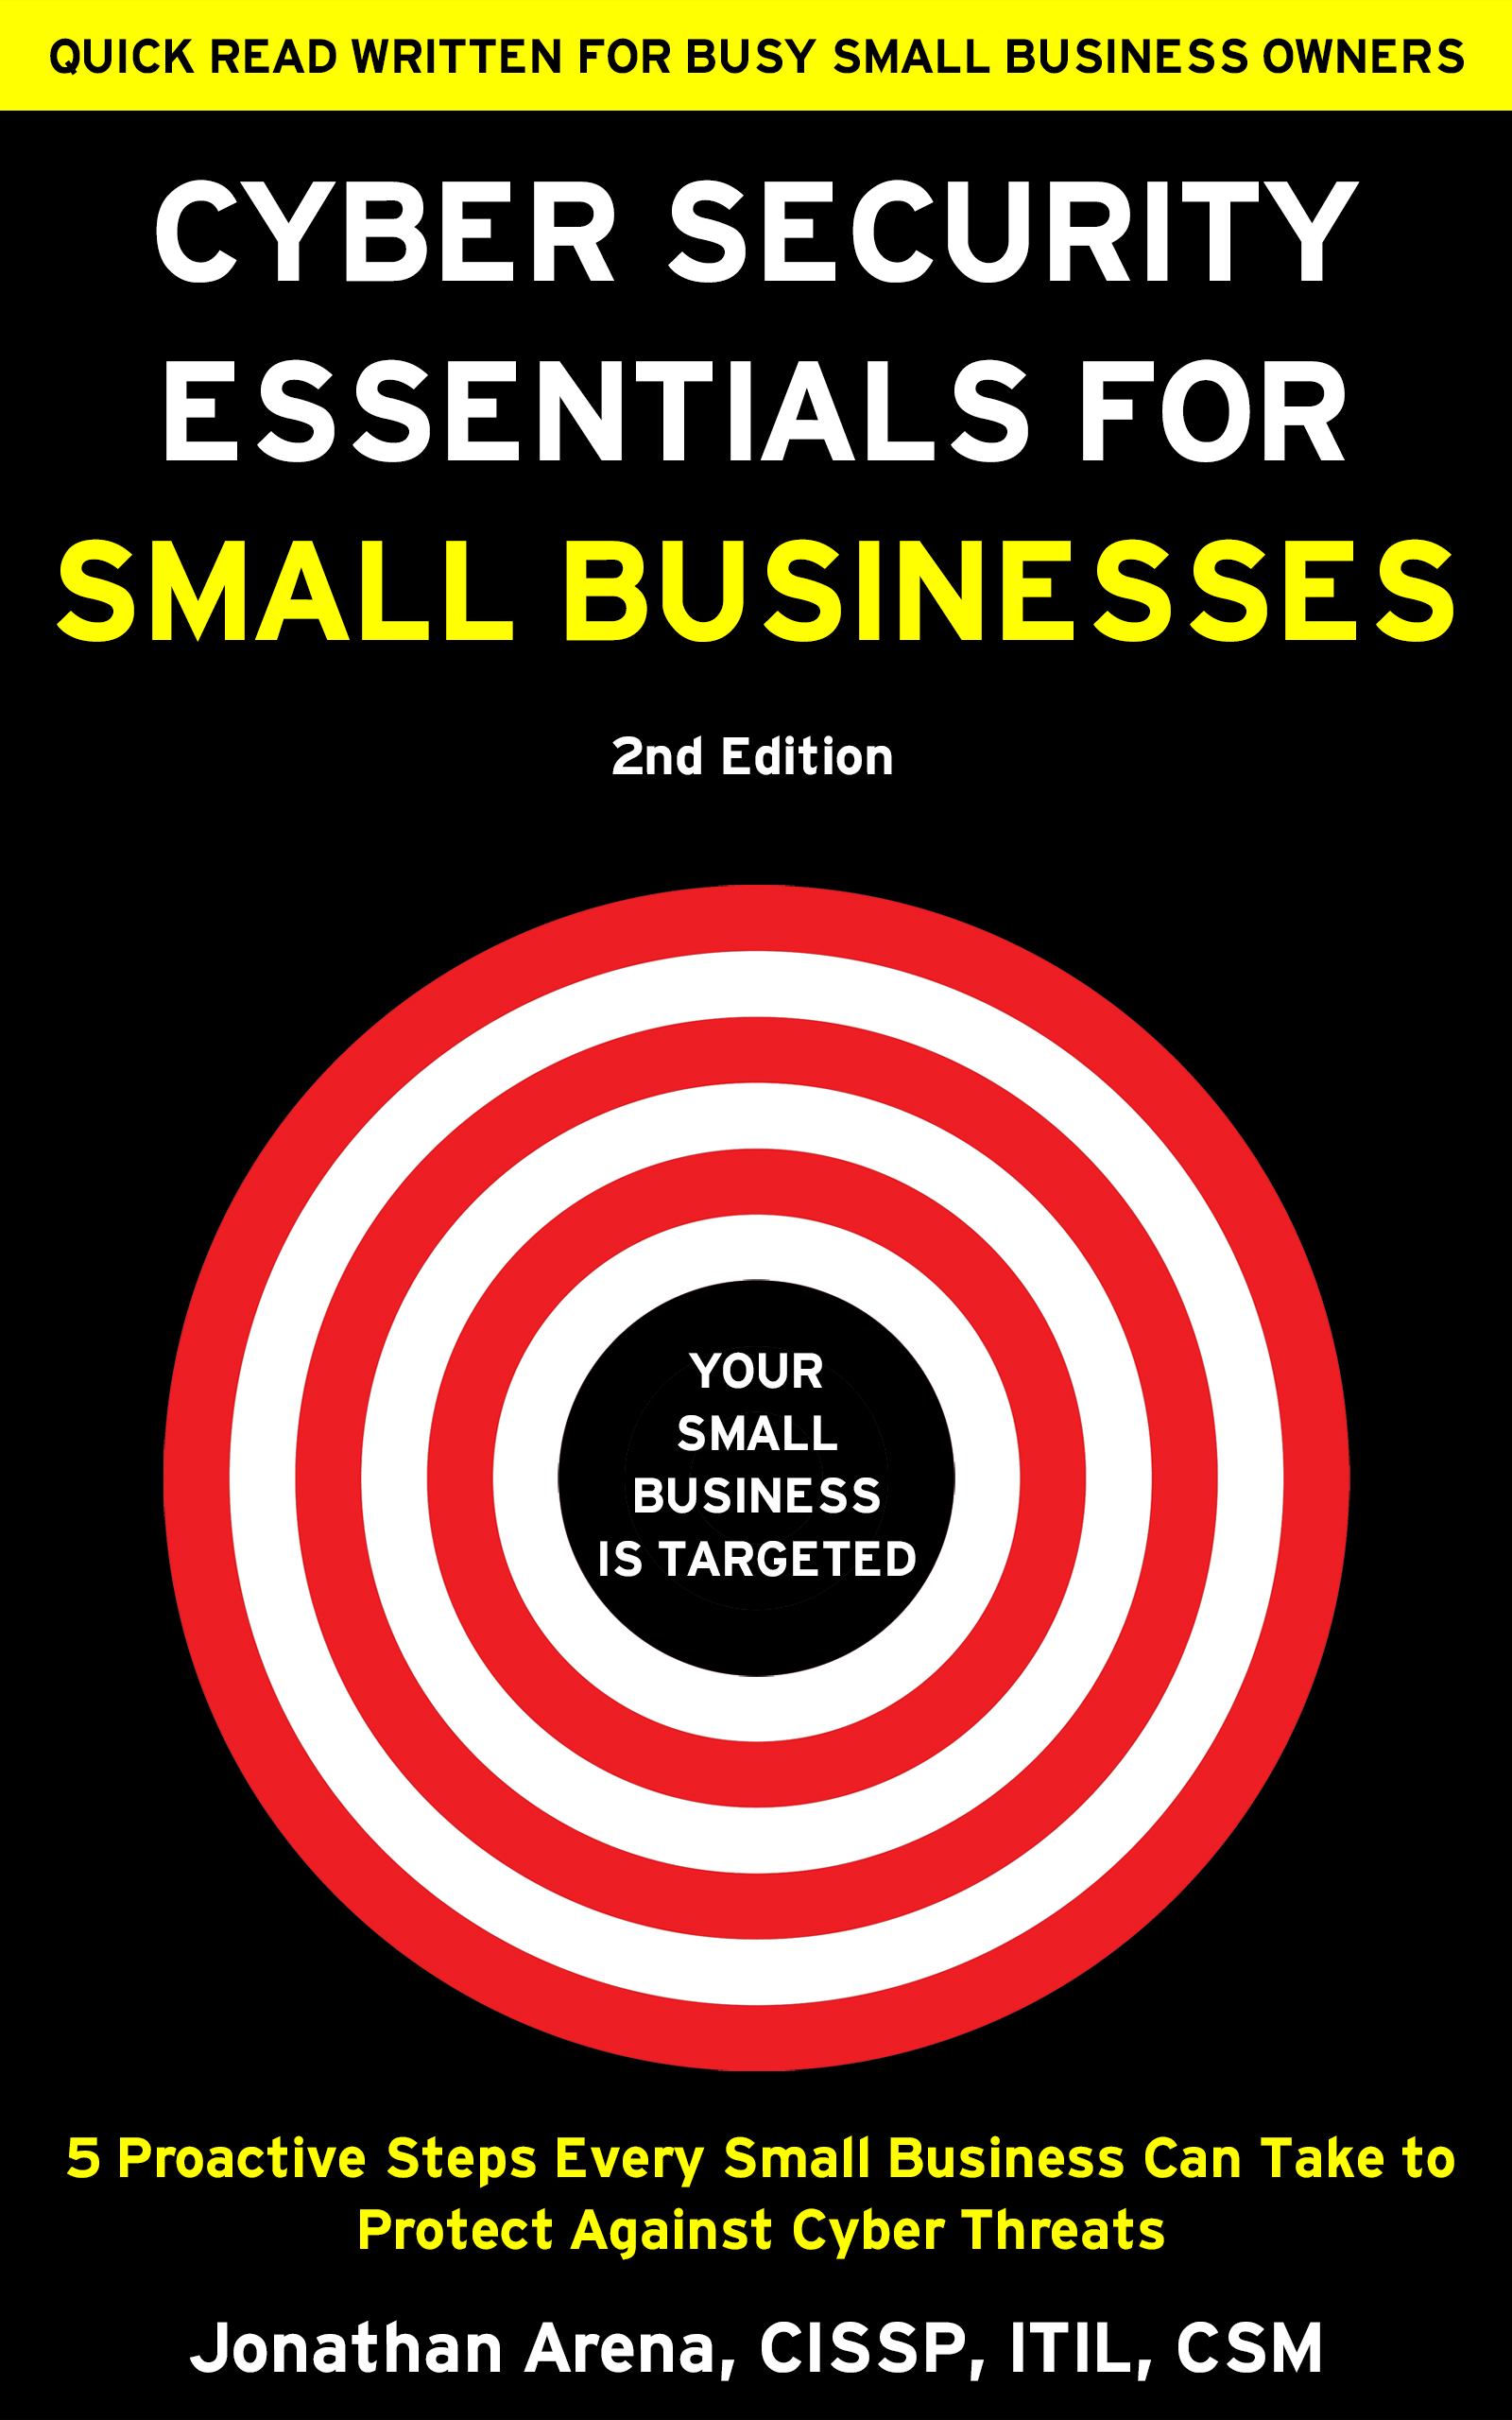 New Book "Cyber Security Essentials for Small Businesses" Published; Technology Service RealTechPros Launched to Help in the Fight Against Small Business Cyber Attacks